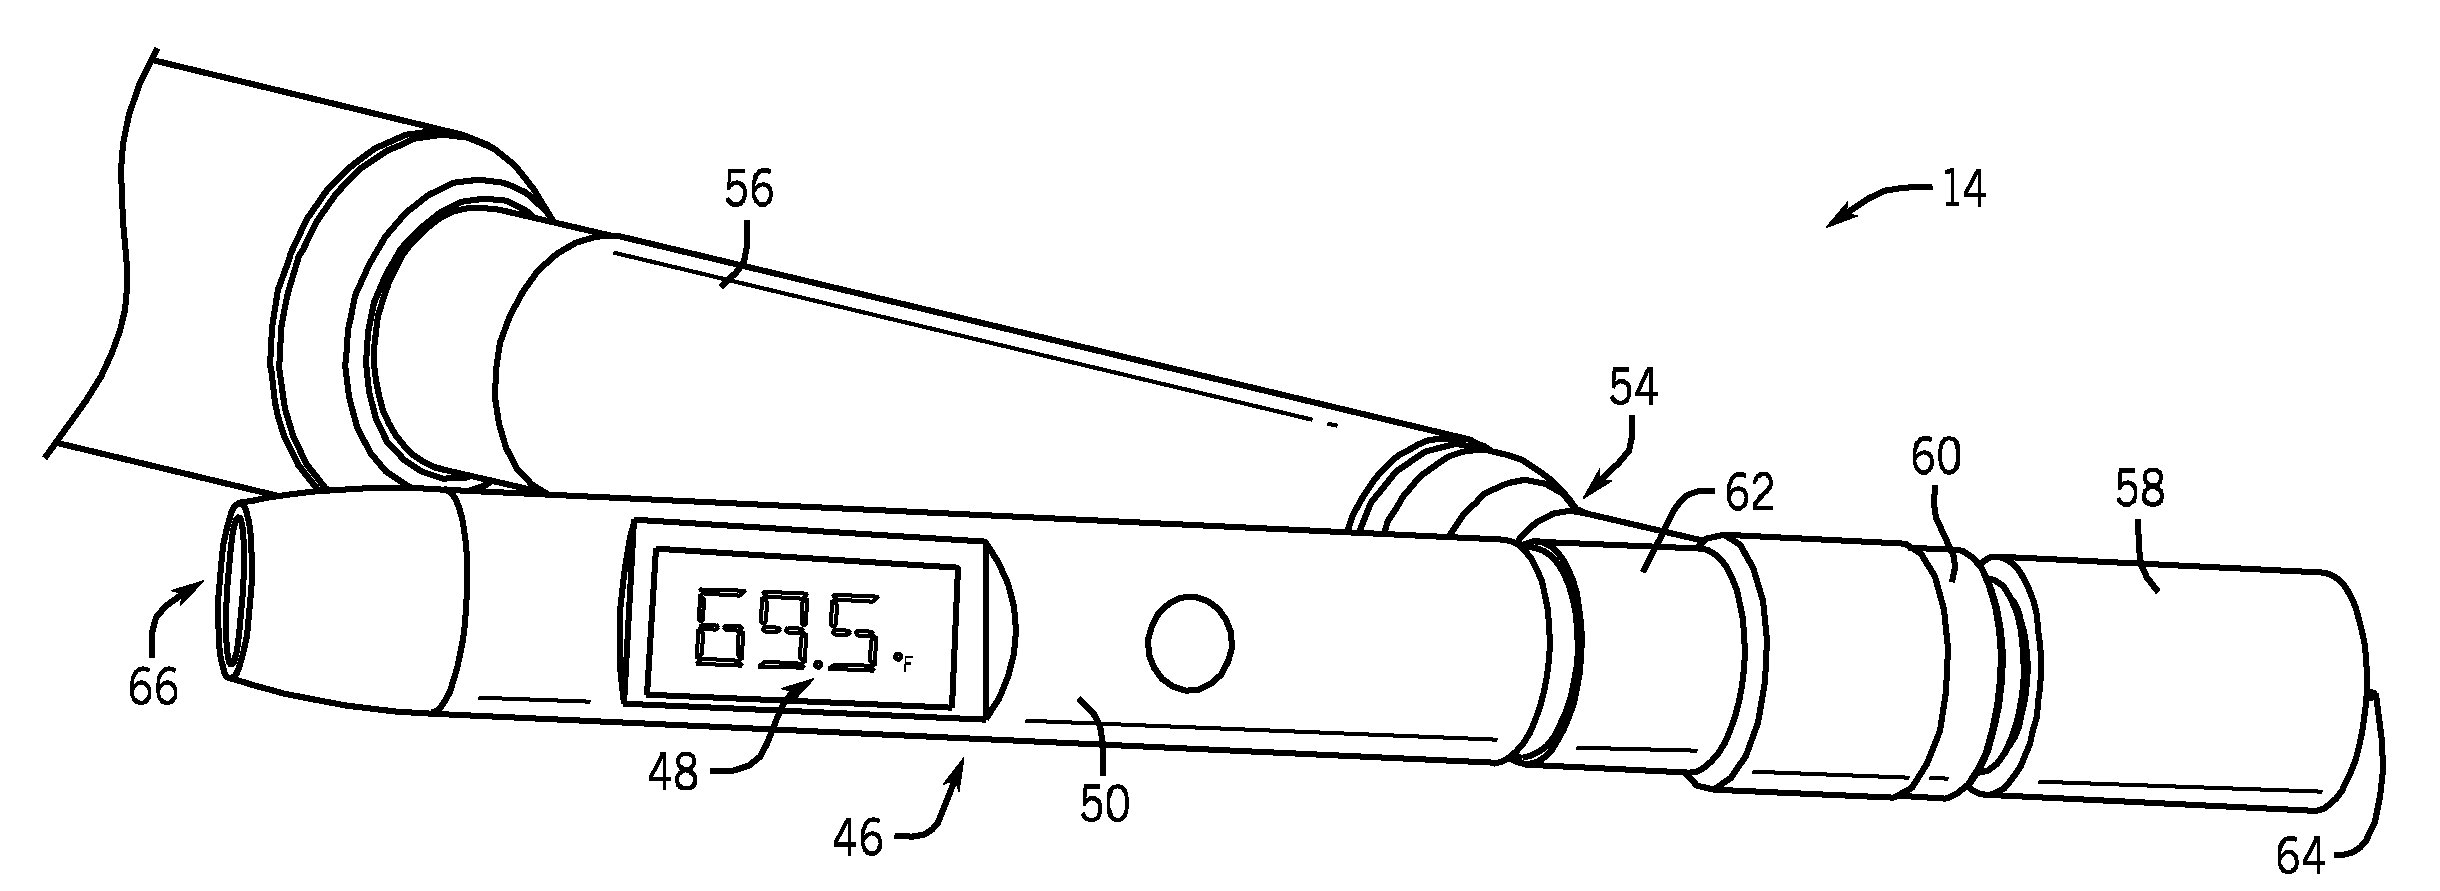 Welding systems having non-contact temperature measurement systems